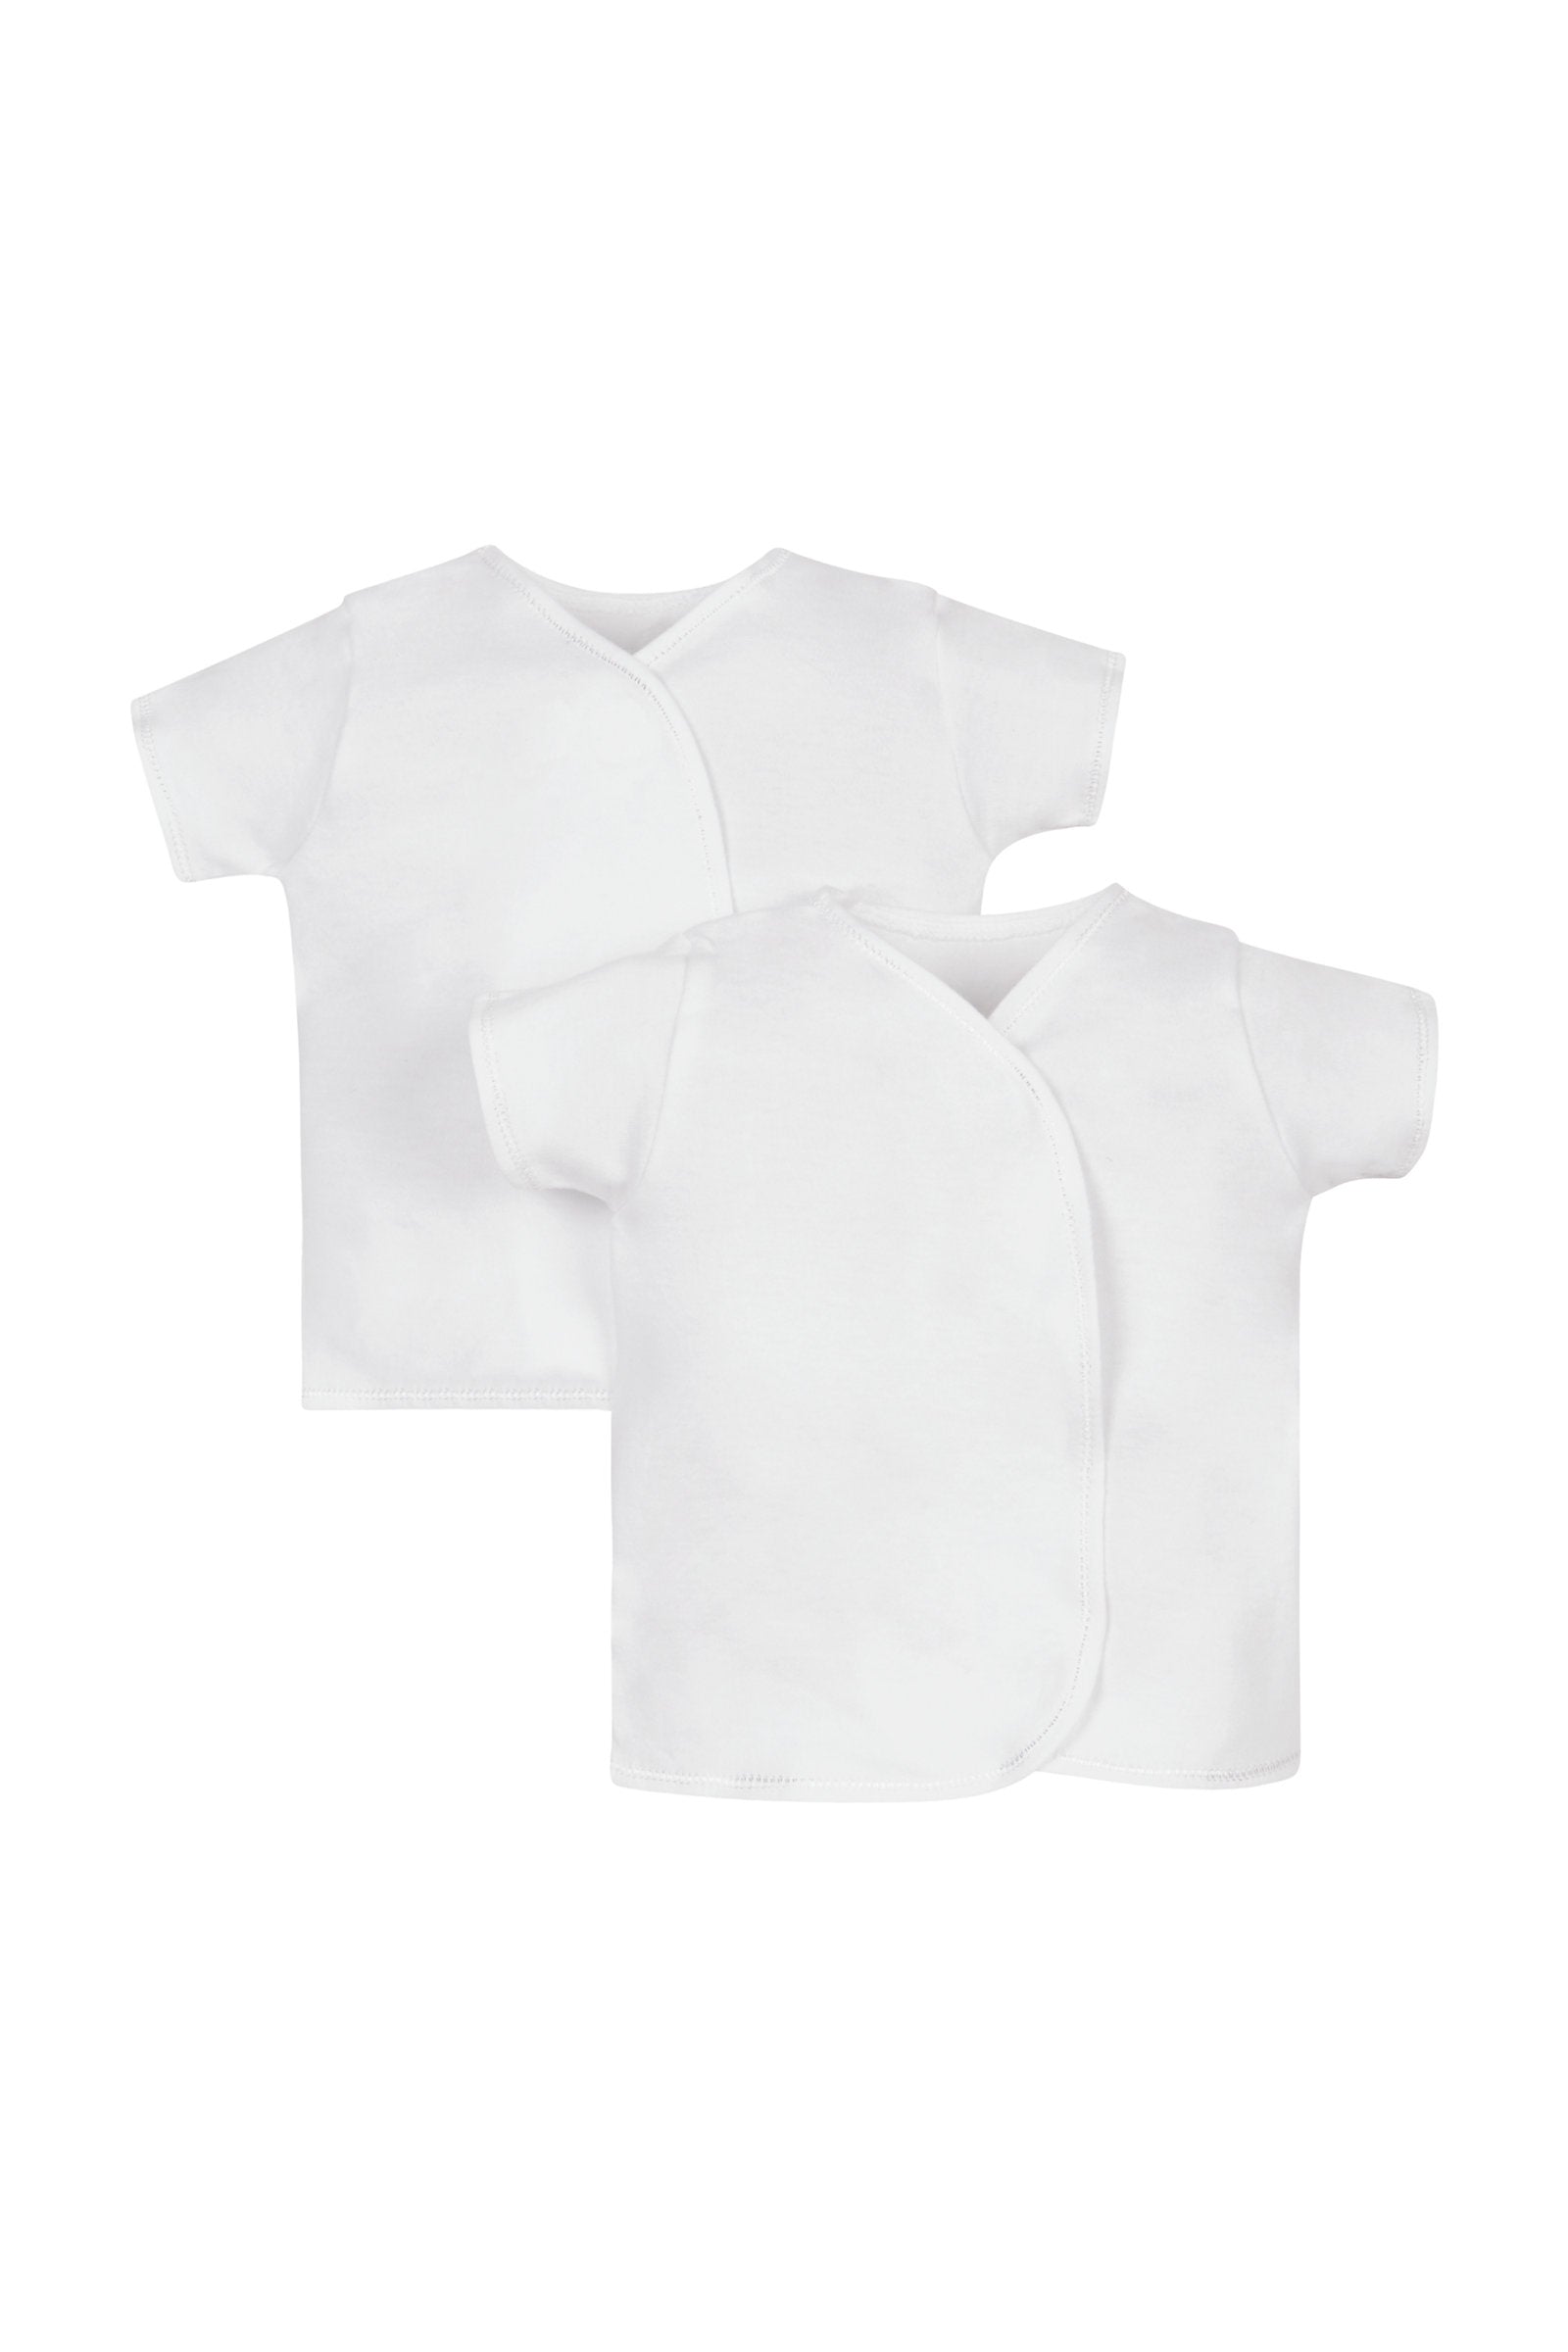 Mothercare My First Short Sleeve Wrap Vests – 2 Pack